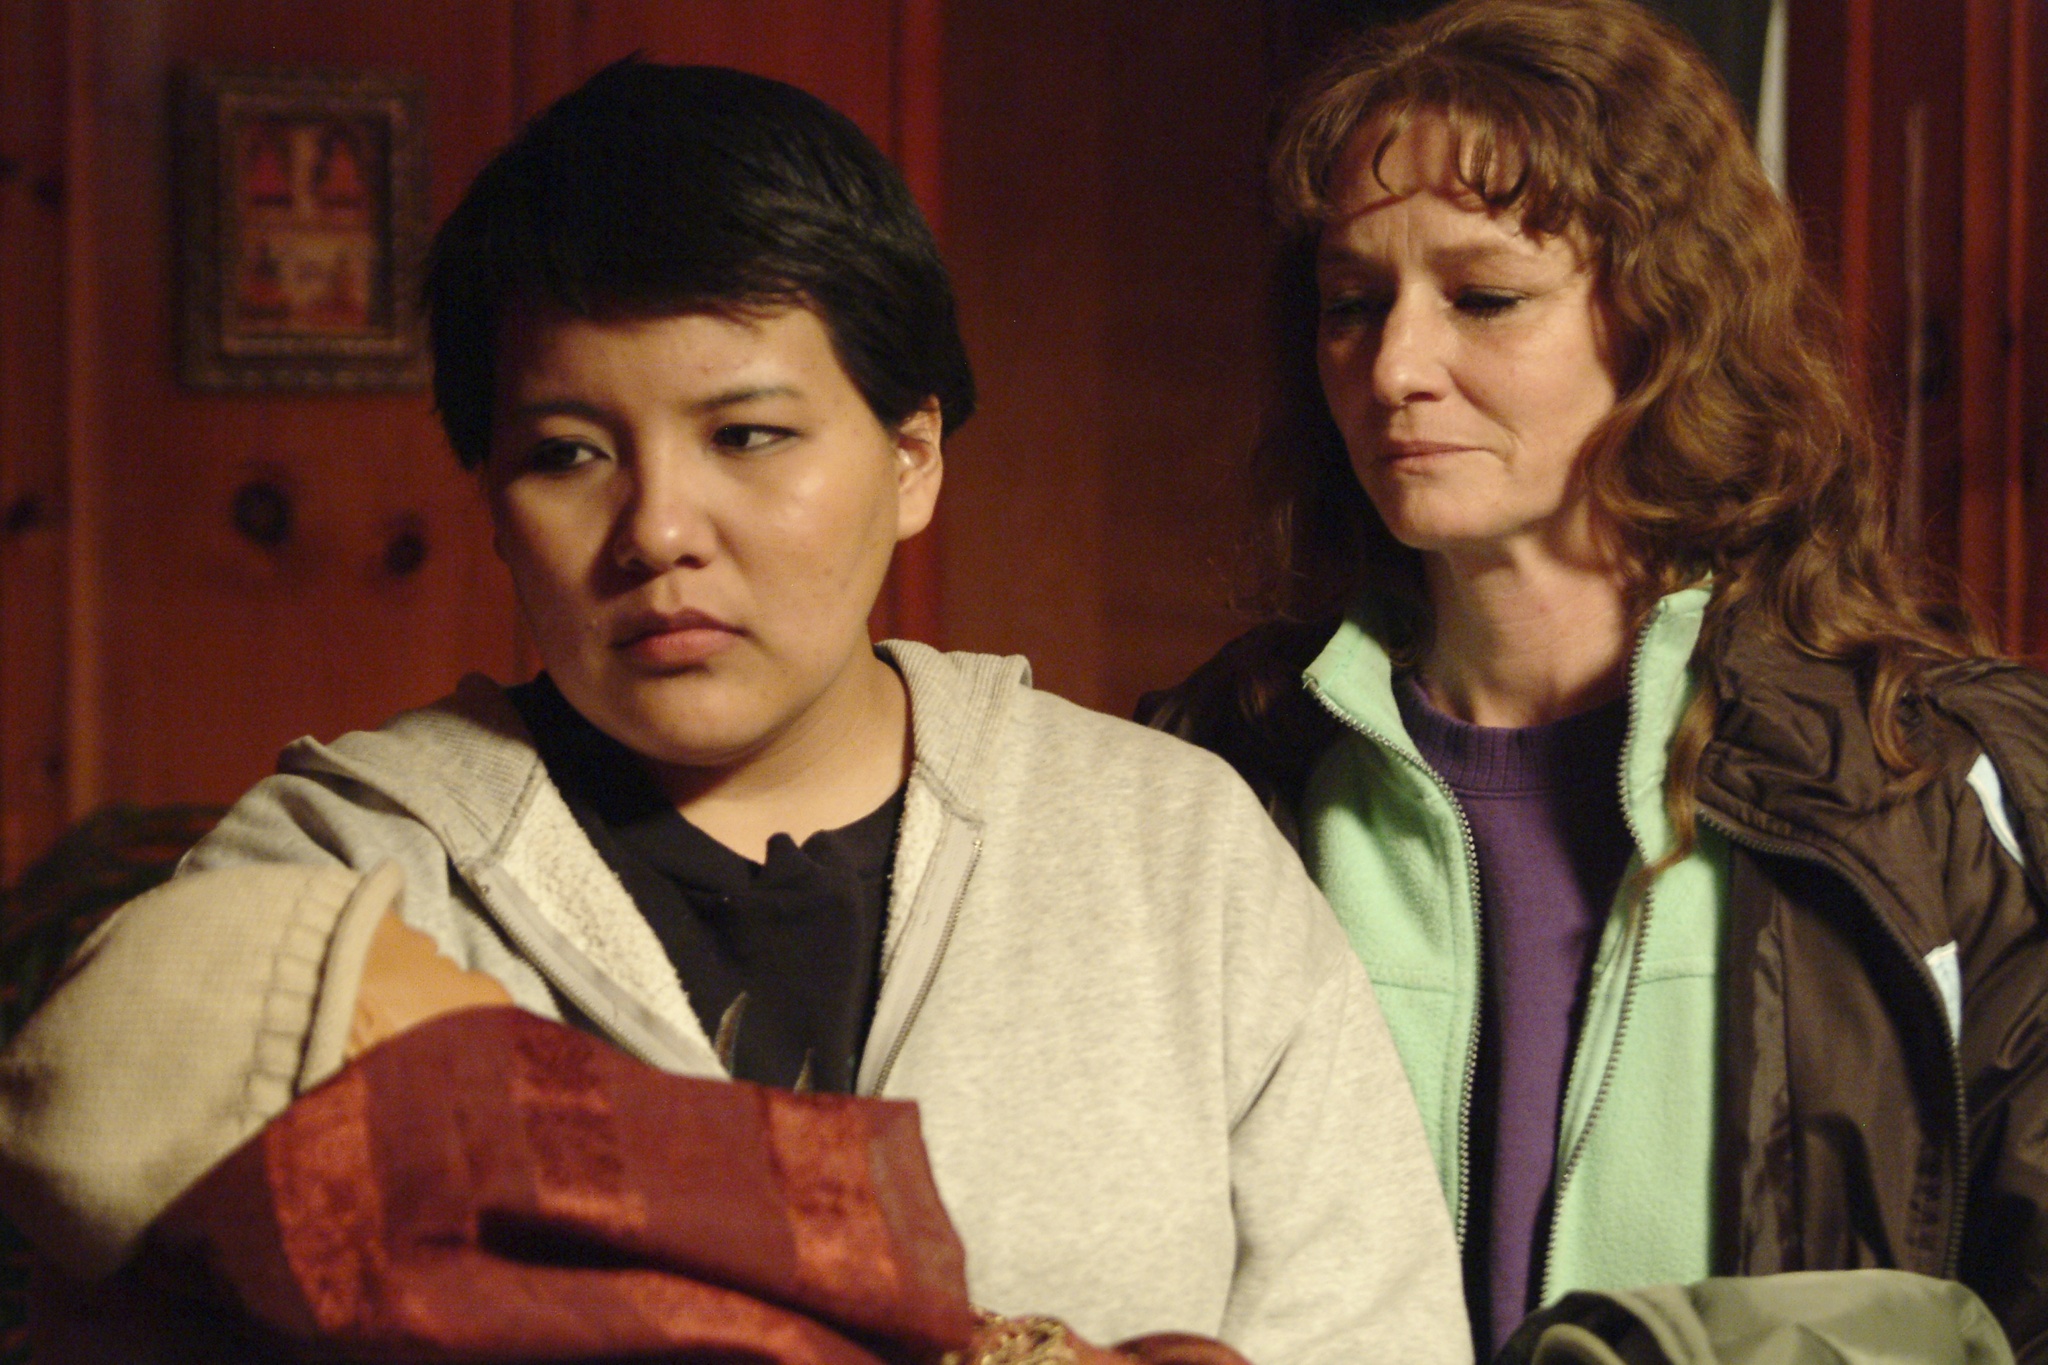 Still of Melissa Leo and Misty Upham in Frozen River (2008)